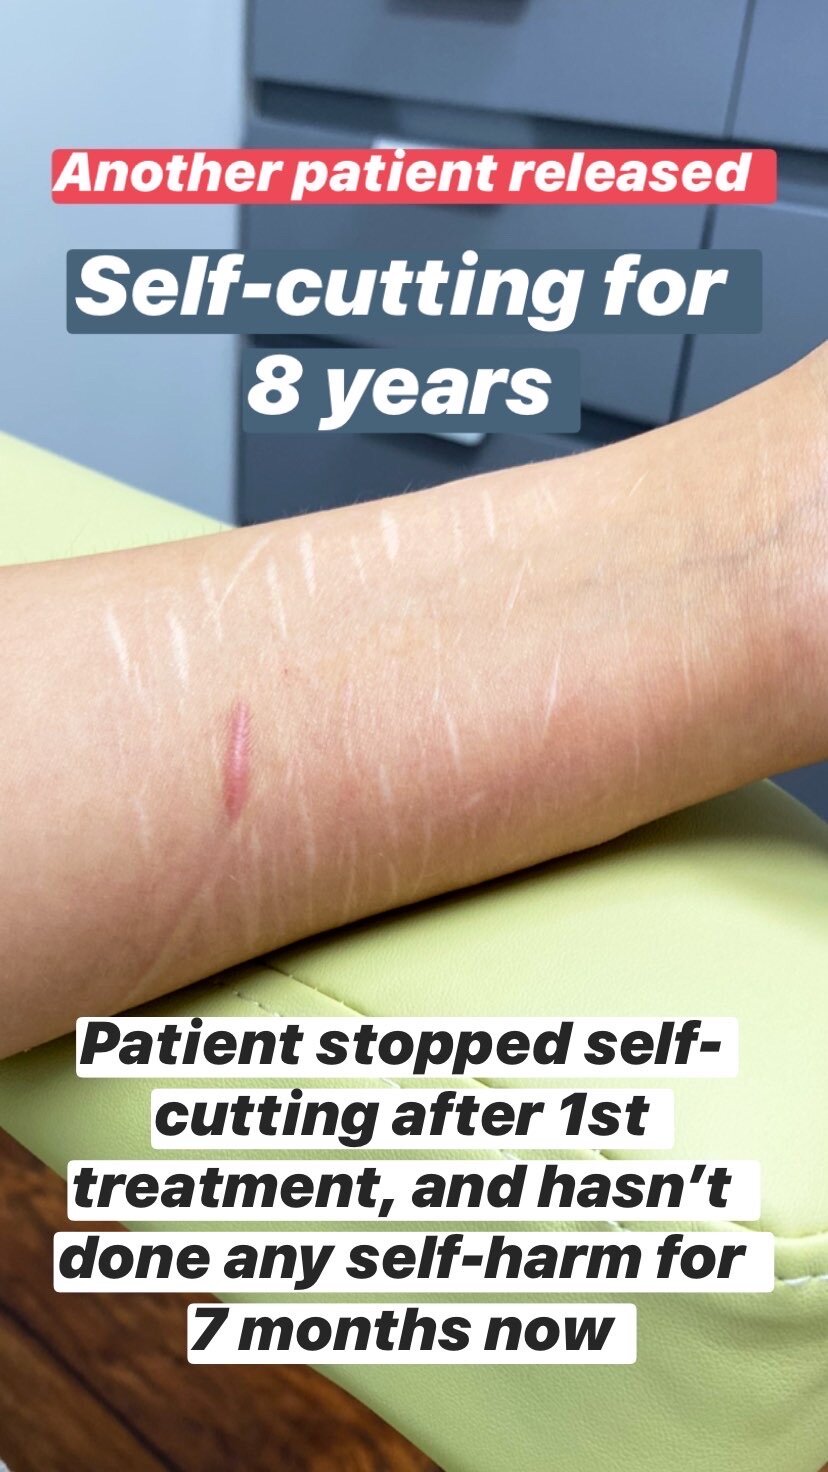  SuJok acupuncture based in vancouver at Alla Ozerova Acupuncture clinic used to treat mental health issues. Patient was treated for self harming. Patient stoped self-cutting since first treatment and has'n’t self harmed in 7 months 